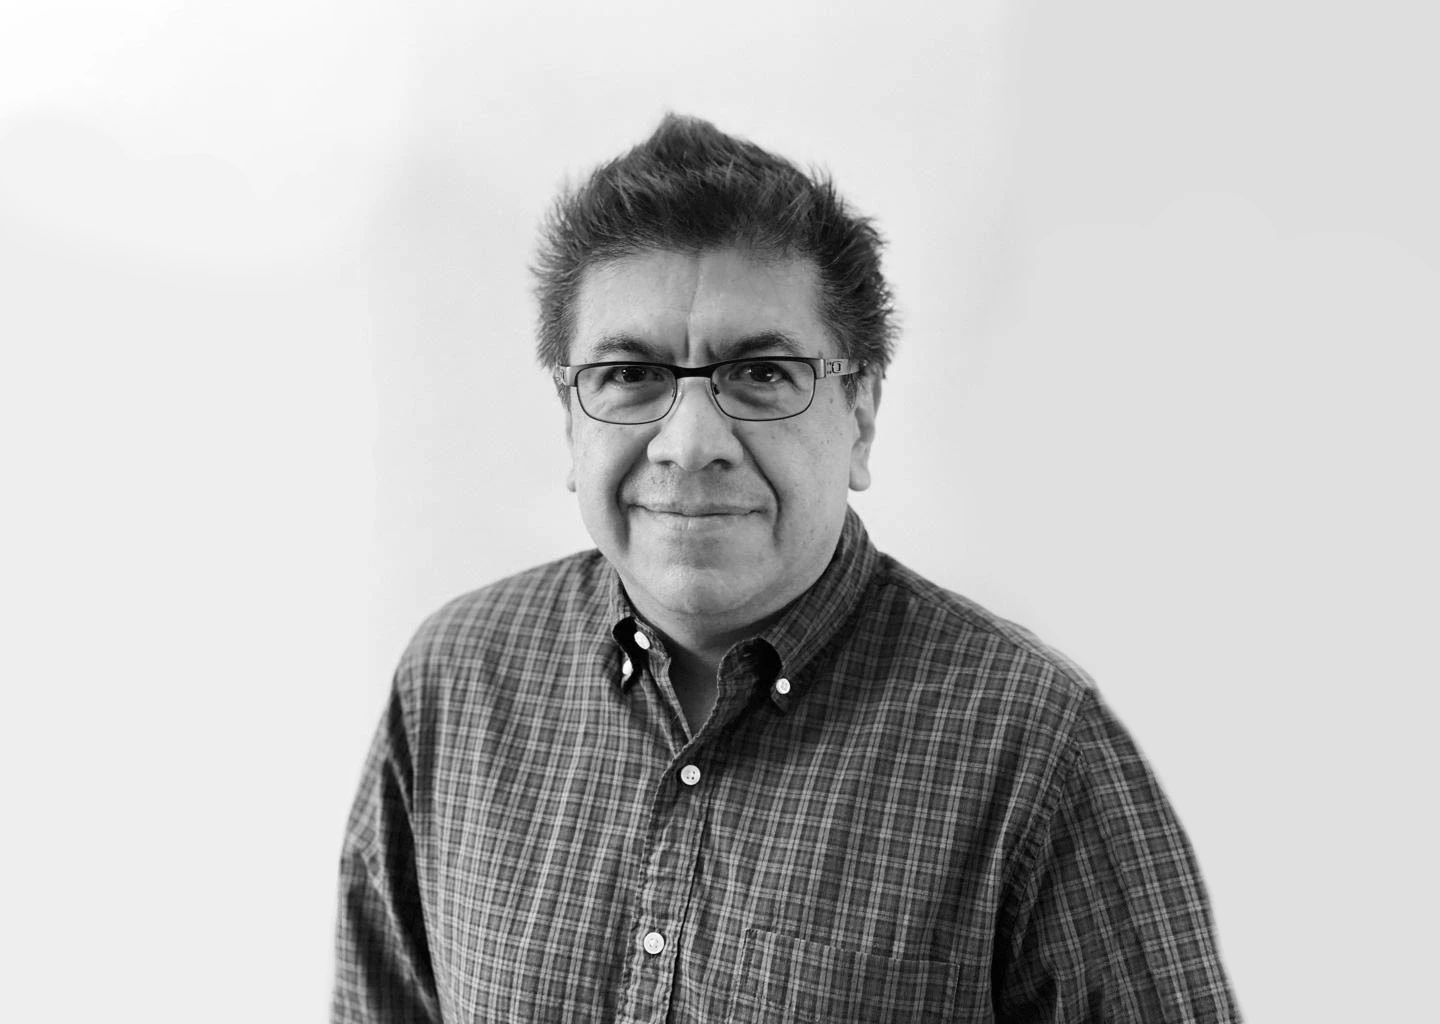 Antonio Medina is the Team Lead for the PORT Data Engineering team at Bloomberg.